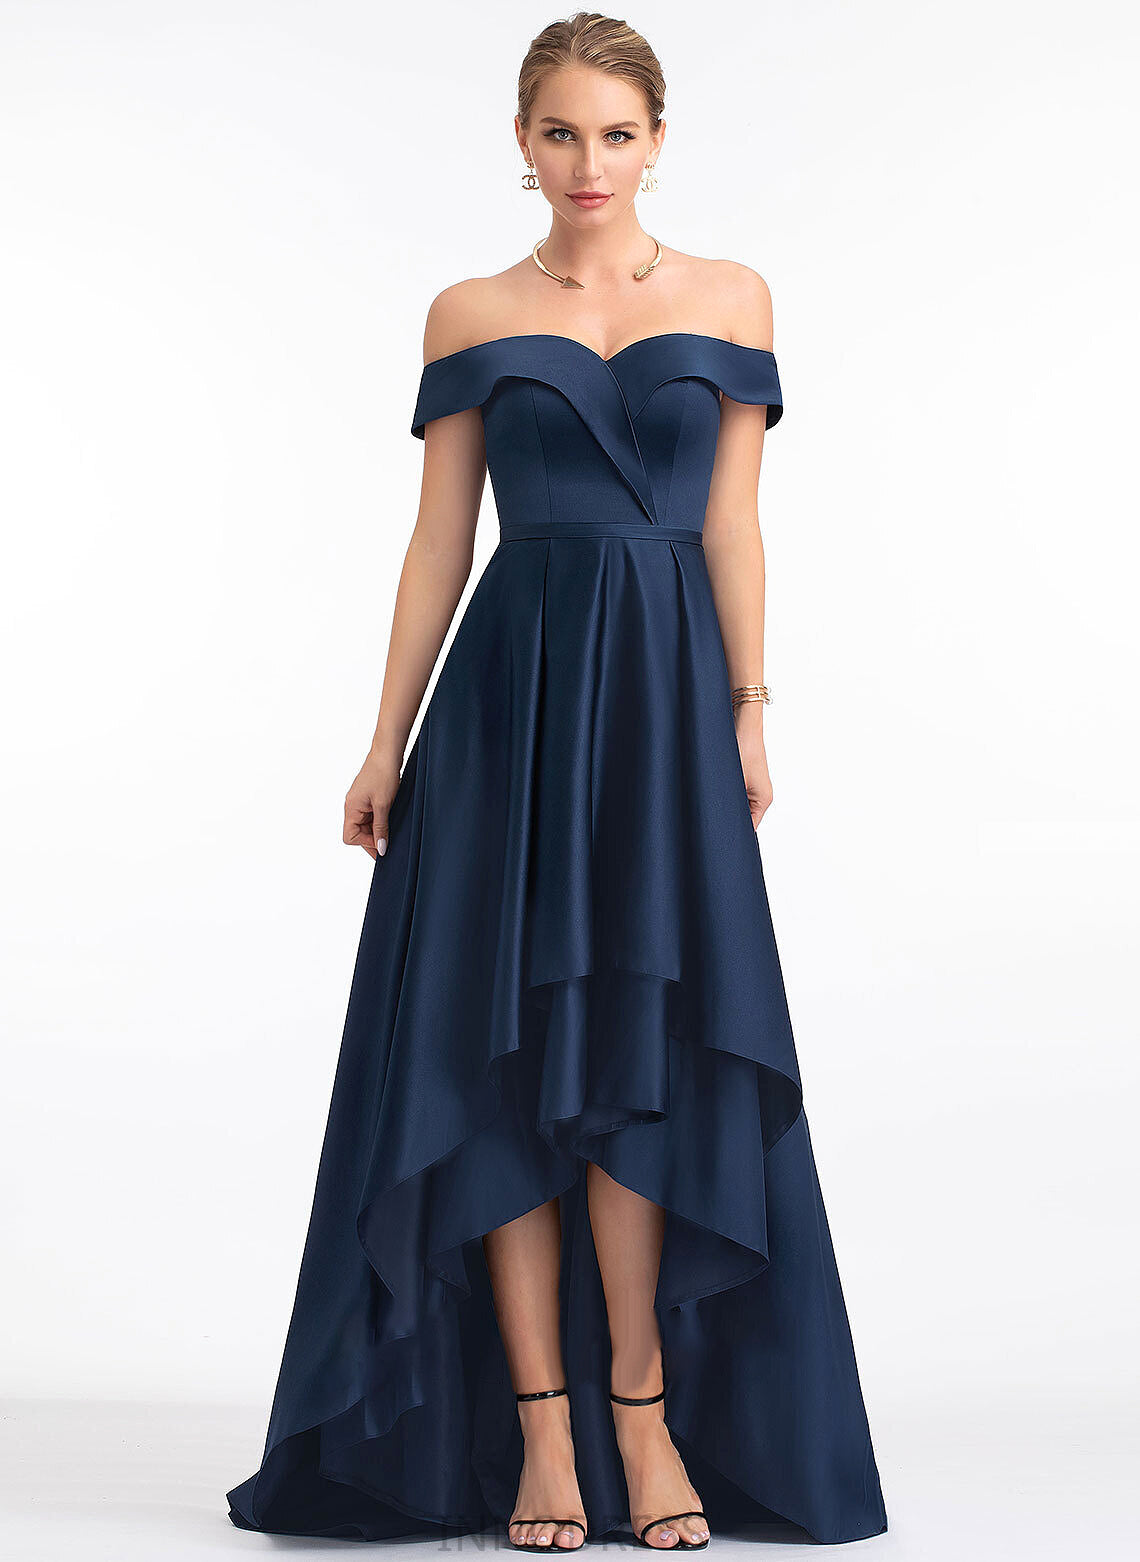 Asymmetrical Off-the-Shoulder Prom Dresses Satin Ball-Gown/Princess Lindsay